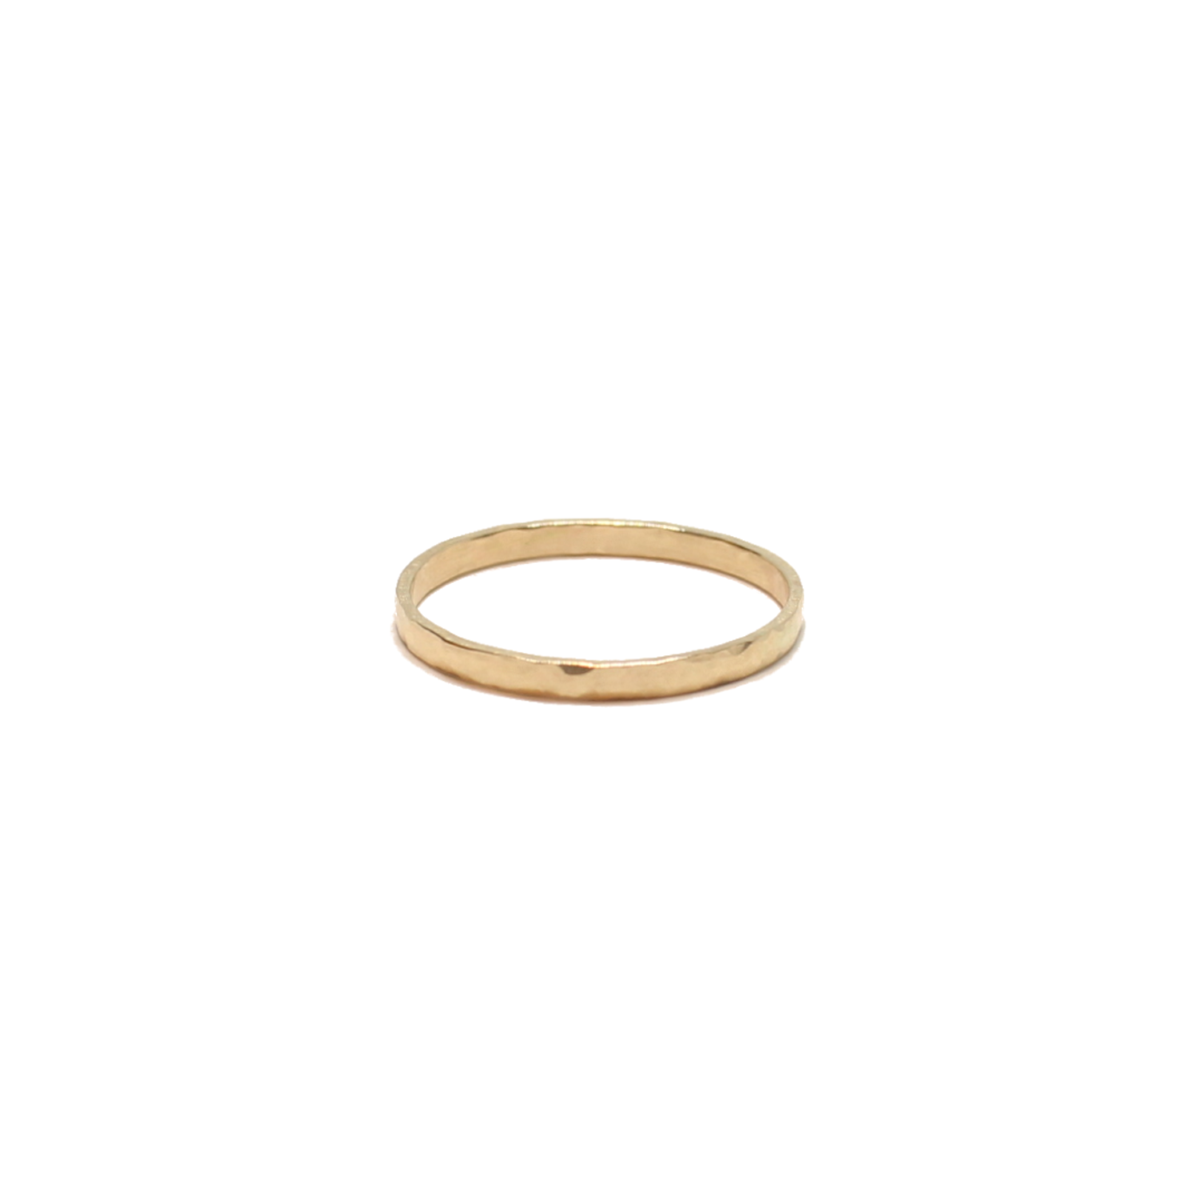 14KT gold hammered wedding band thin stacking ring